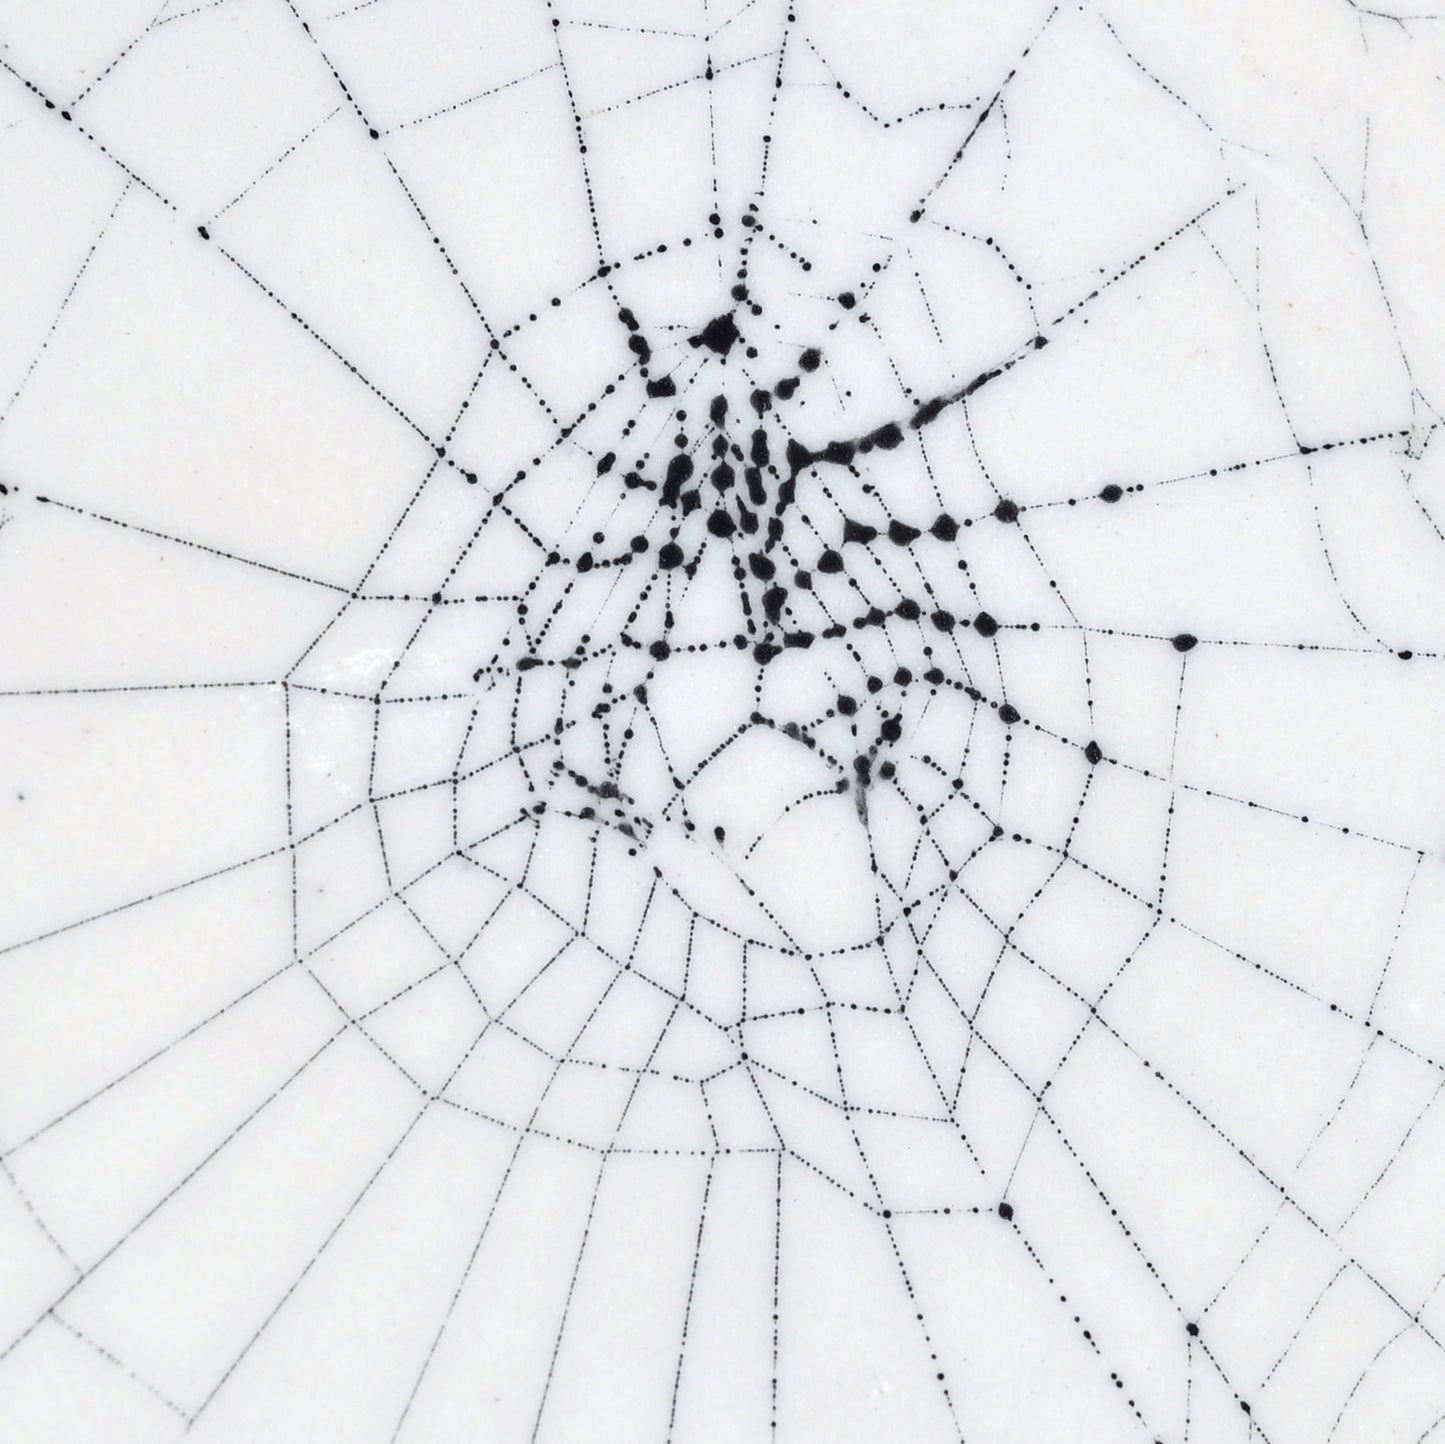 Web on Clay (225), Collected October 21, 2022